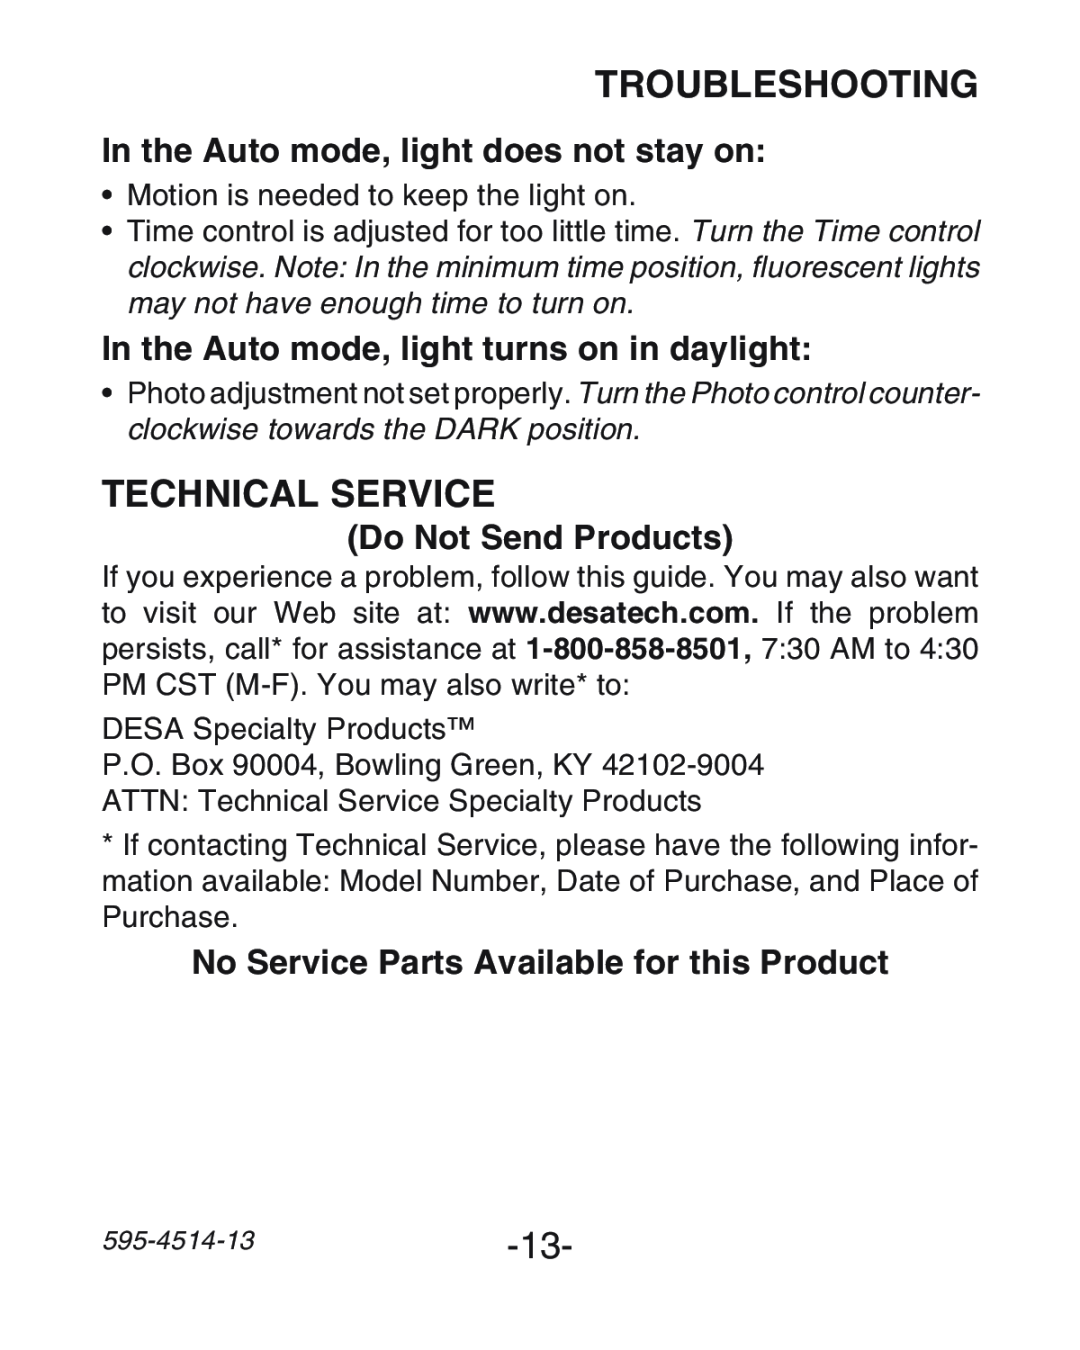 Heath Zenith SL-6107 Technical Service, In the Auto mode, light does not stay on, Do Not Send Products, Troubleshooting 